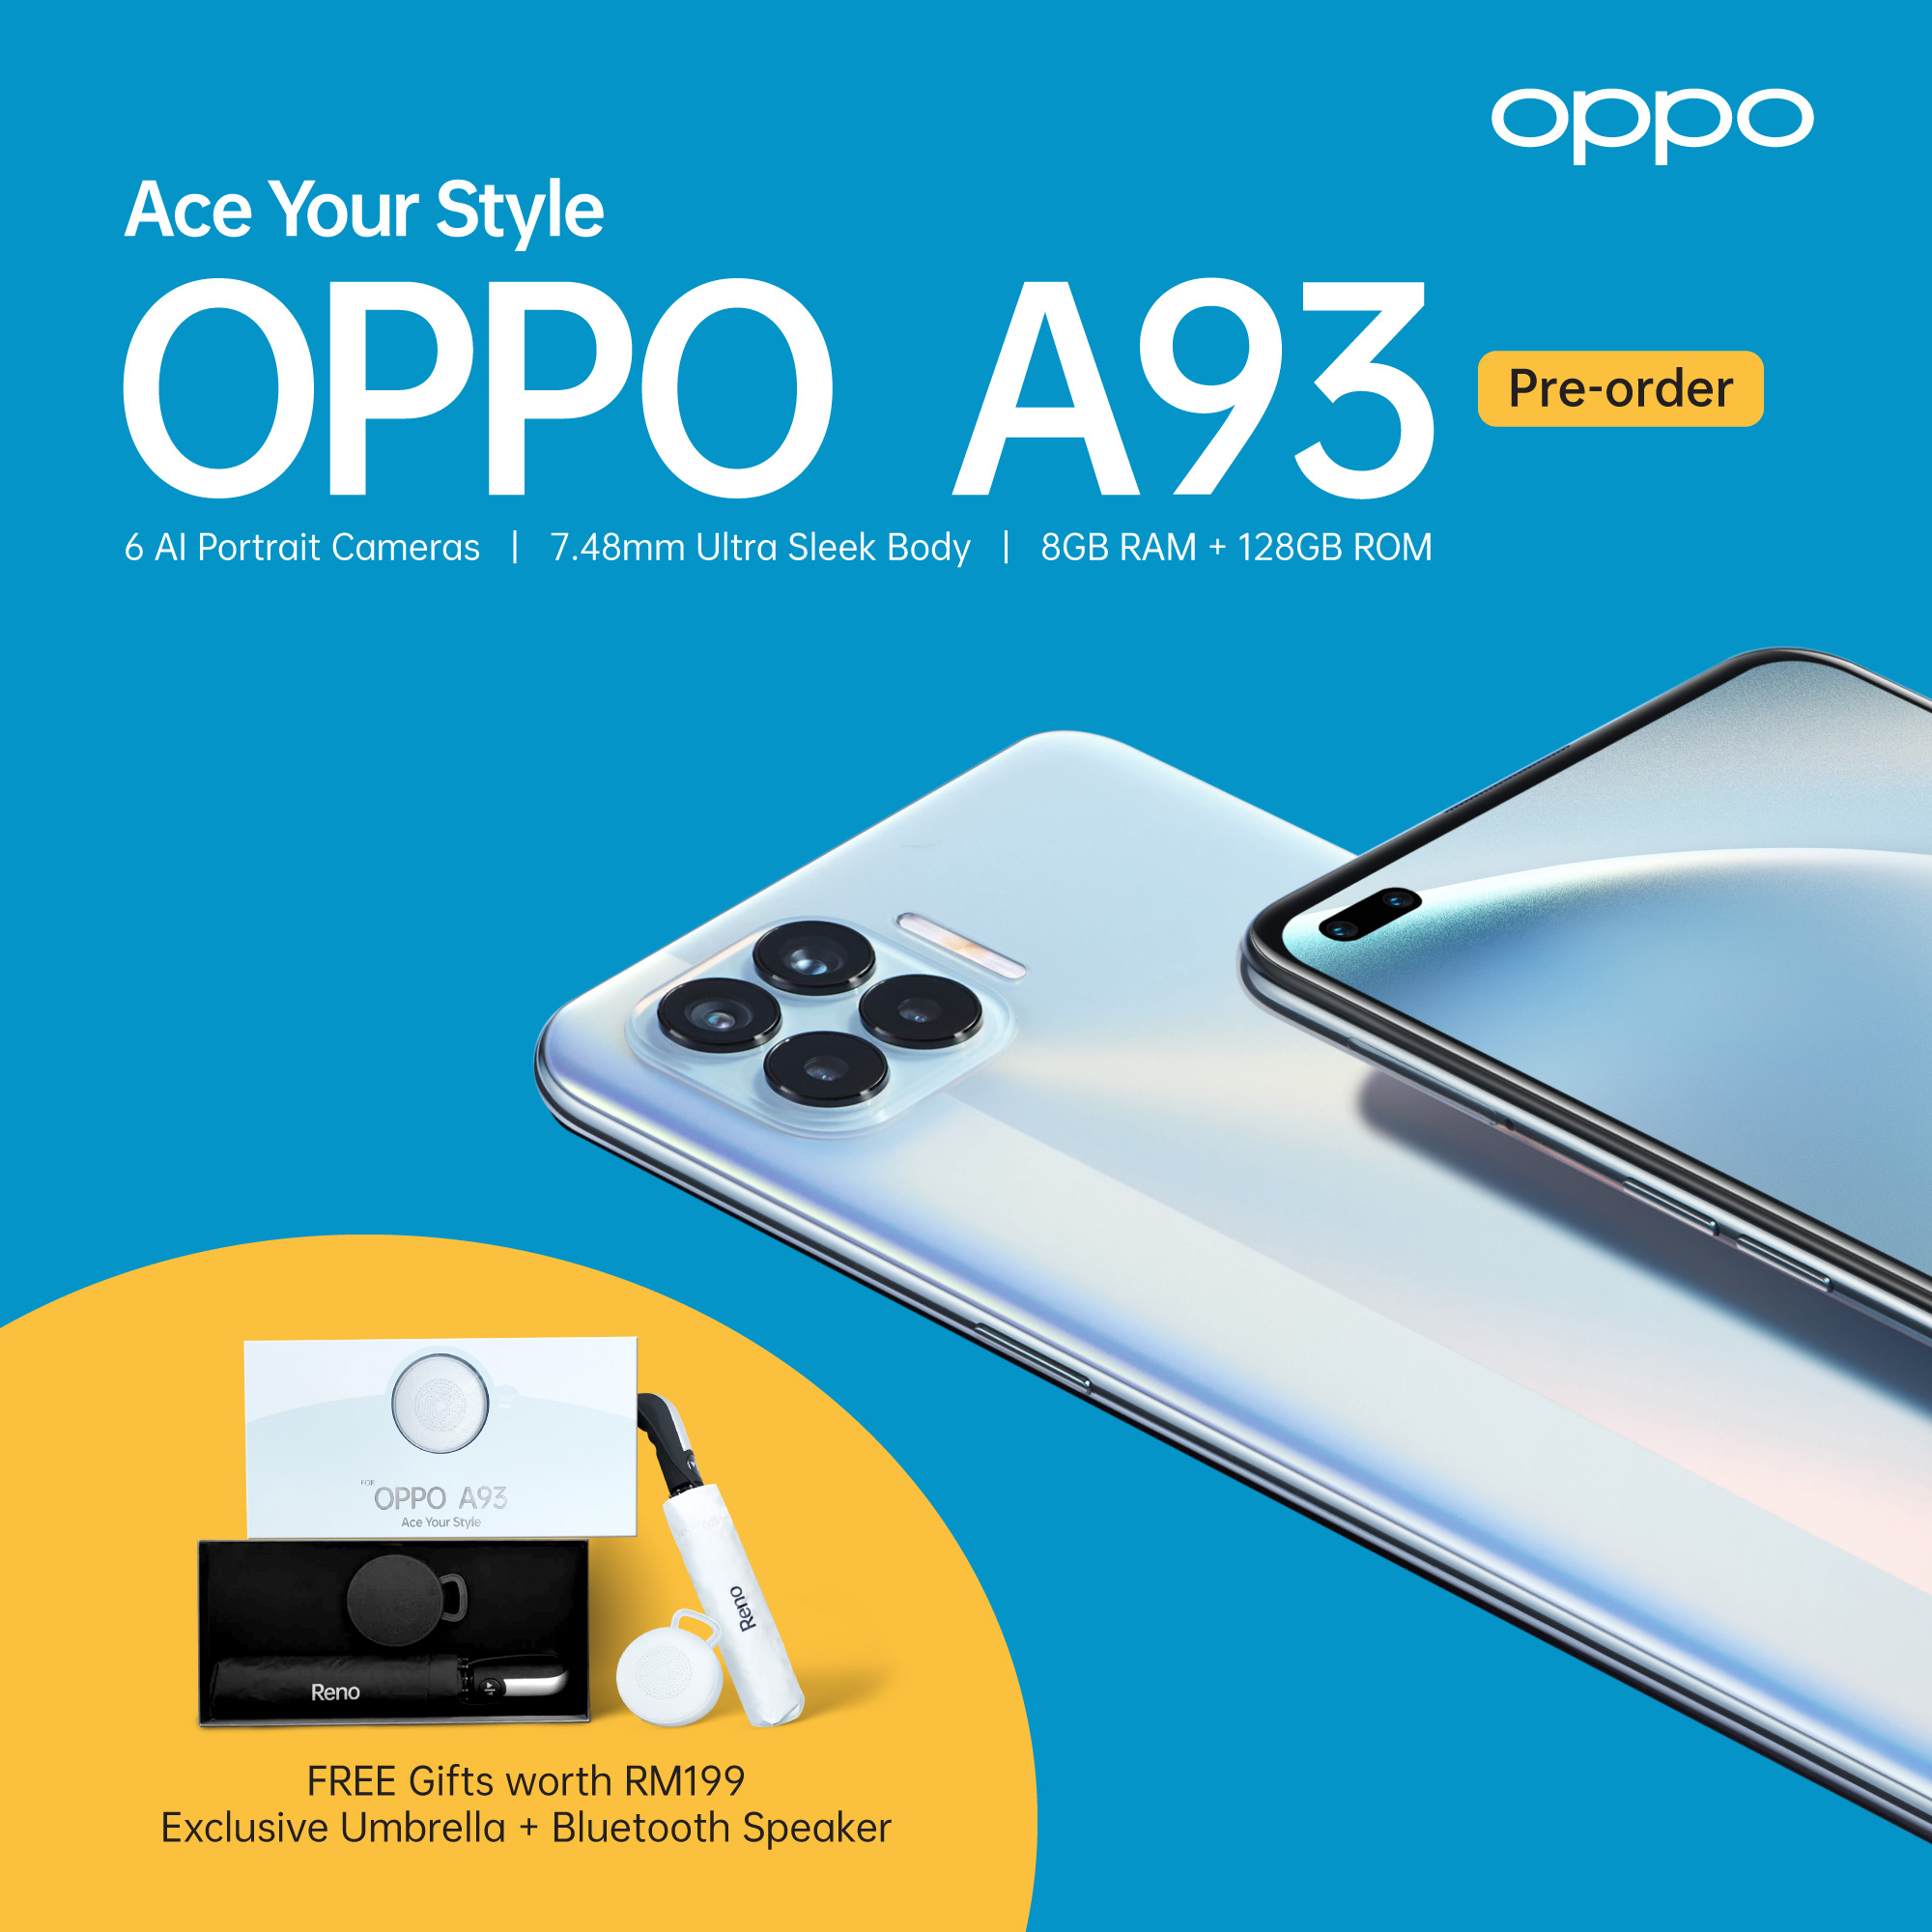 OPPO A93 is going to launch on 6 October with